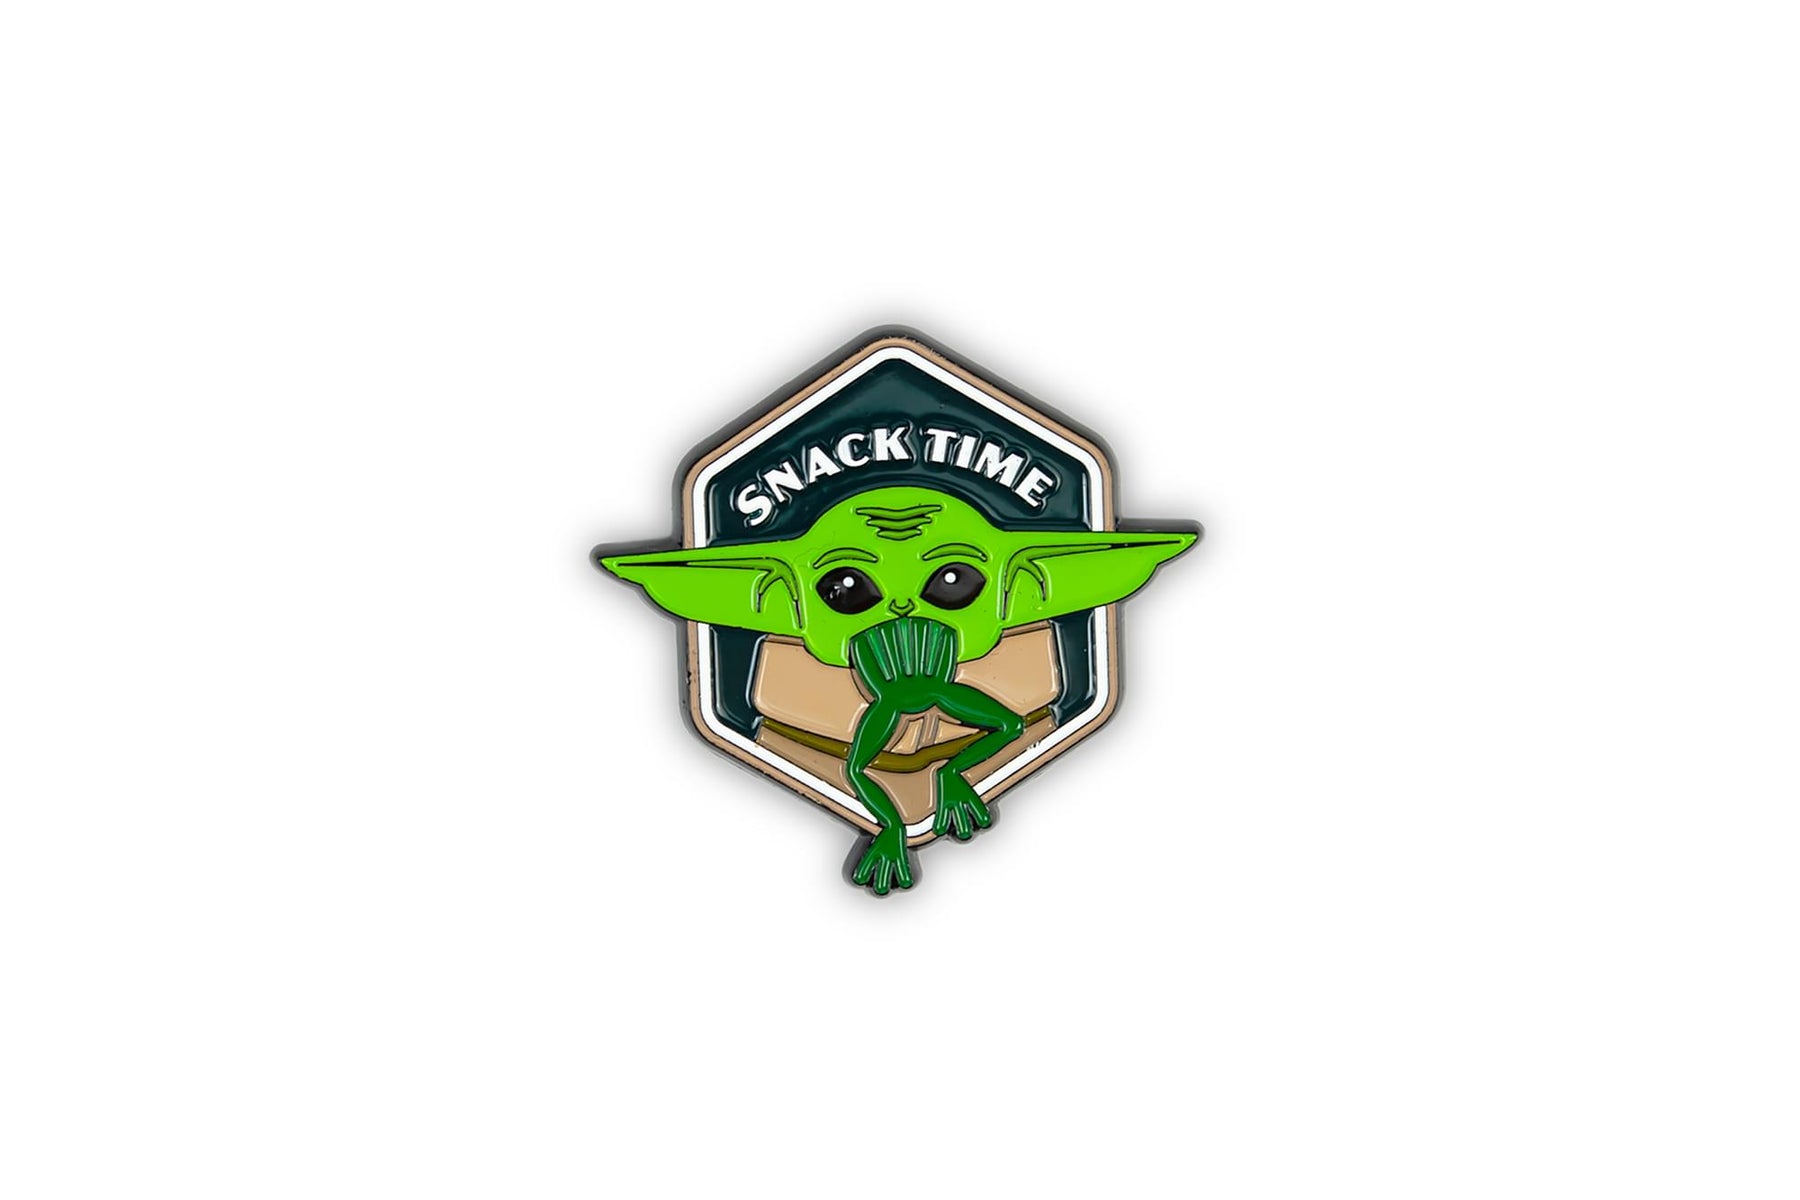 Star Wars: The Mandalorian The Child Collector Pin | Baby Yoda At Snack Time